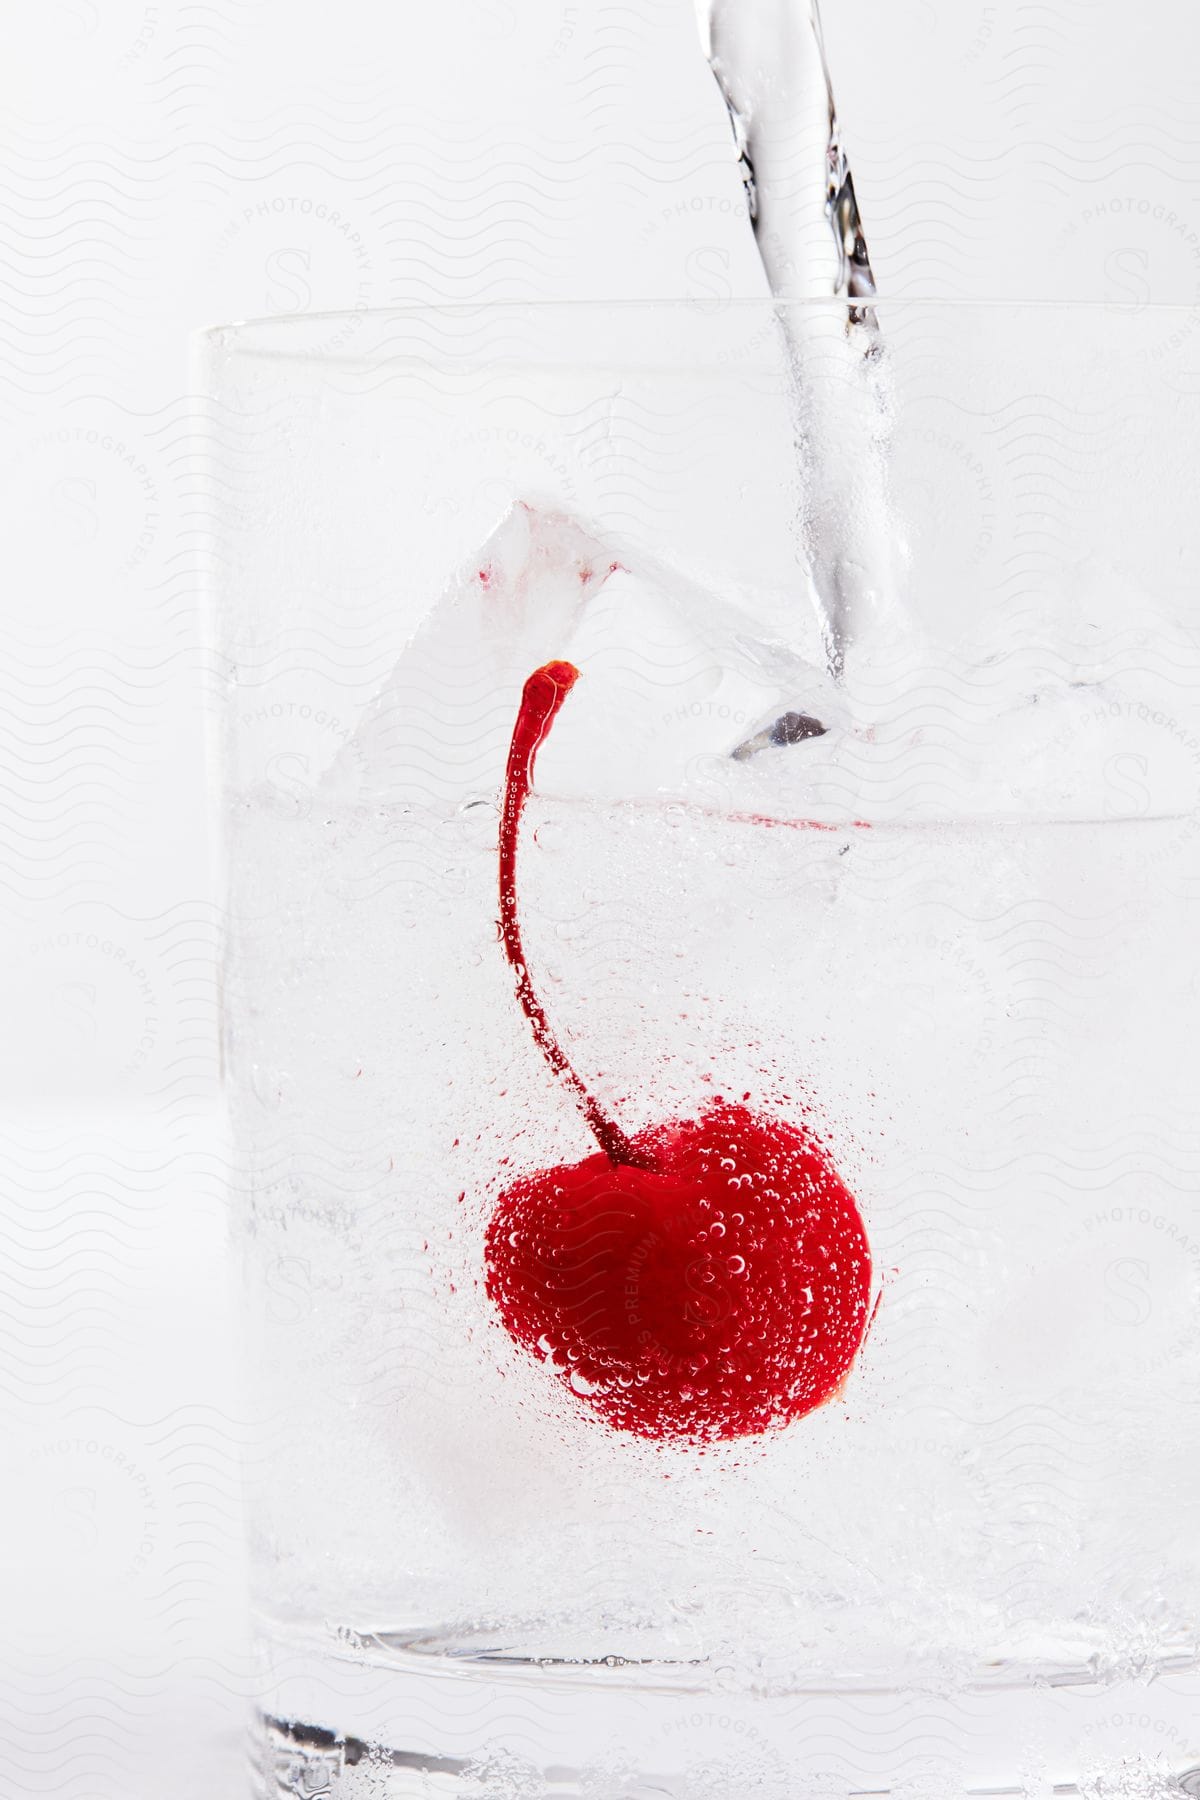 Stock photo of transparent glass with liquid and ice and a submerged cherry with stem.